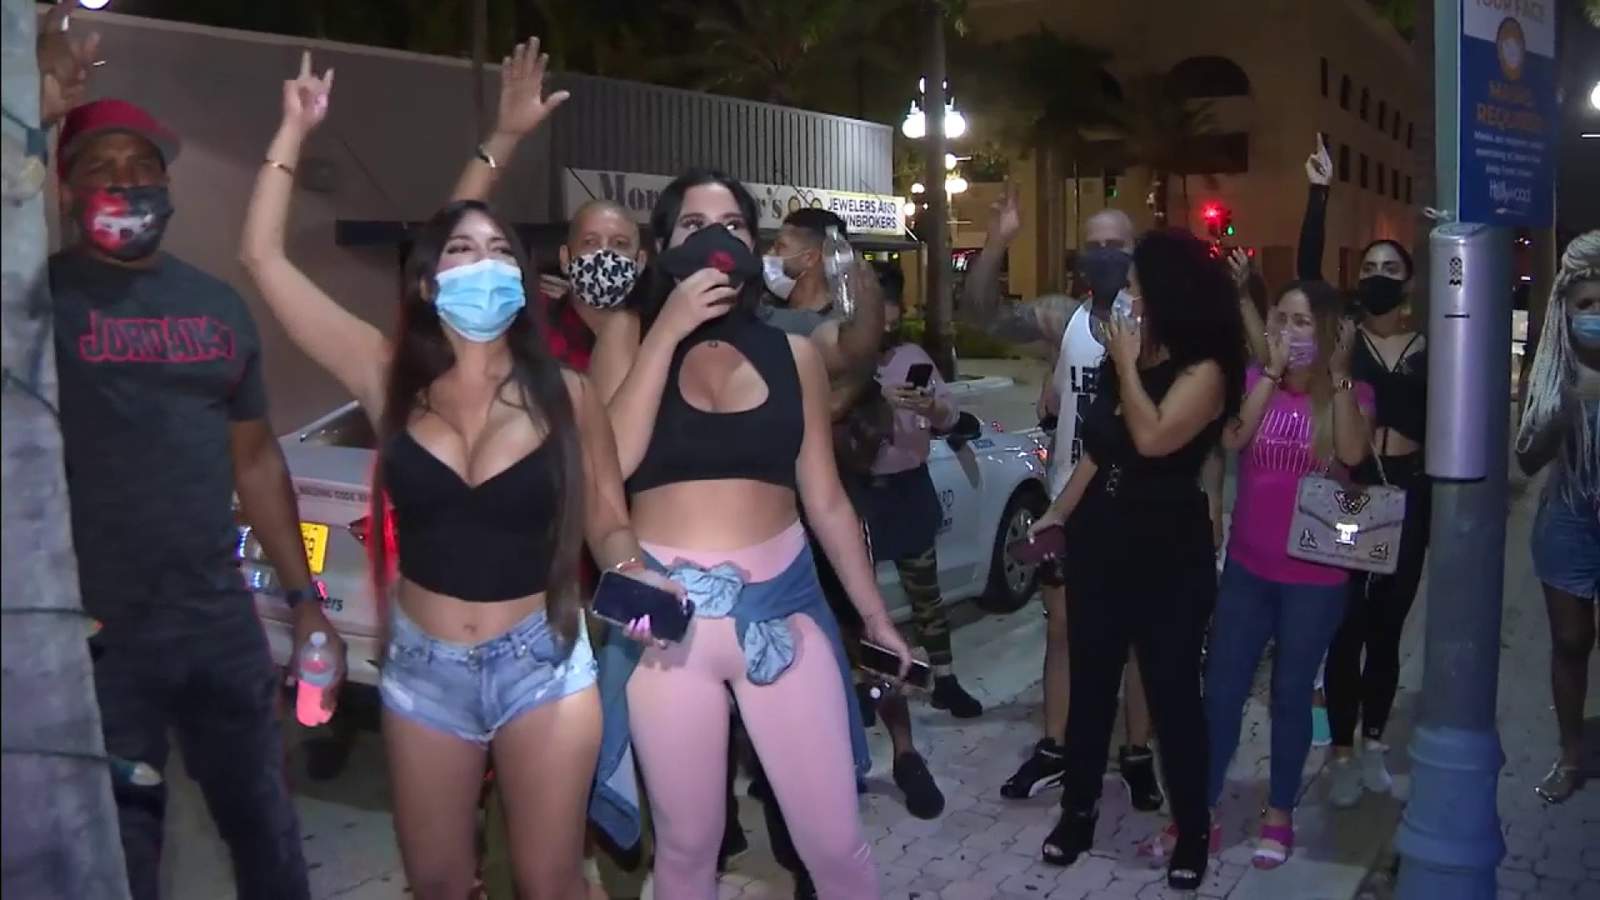 ‘We want to work,’ Broward nightlife workers shout during protest